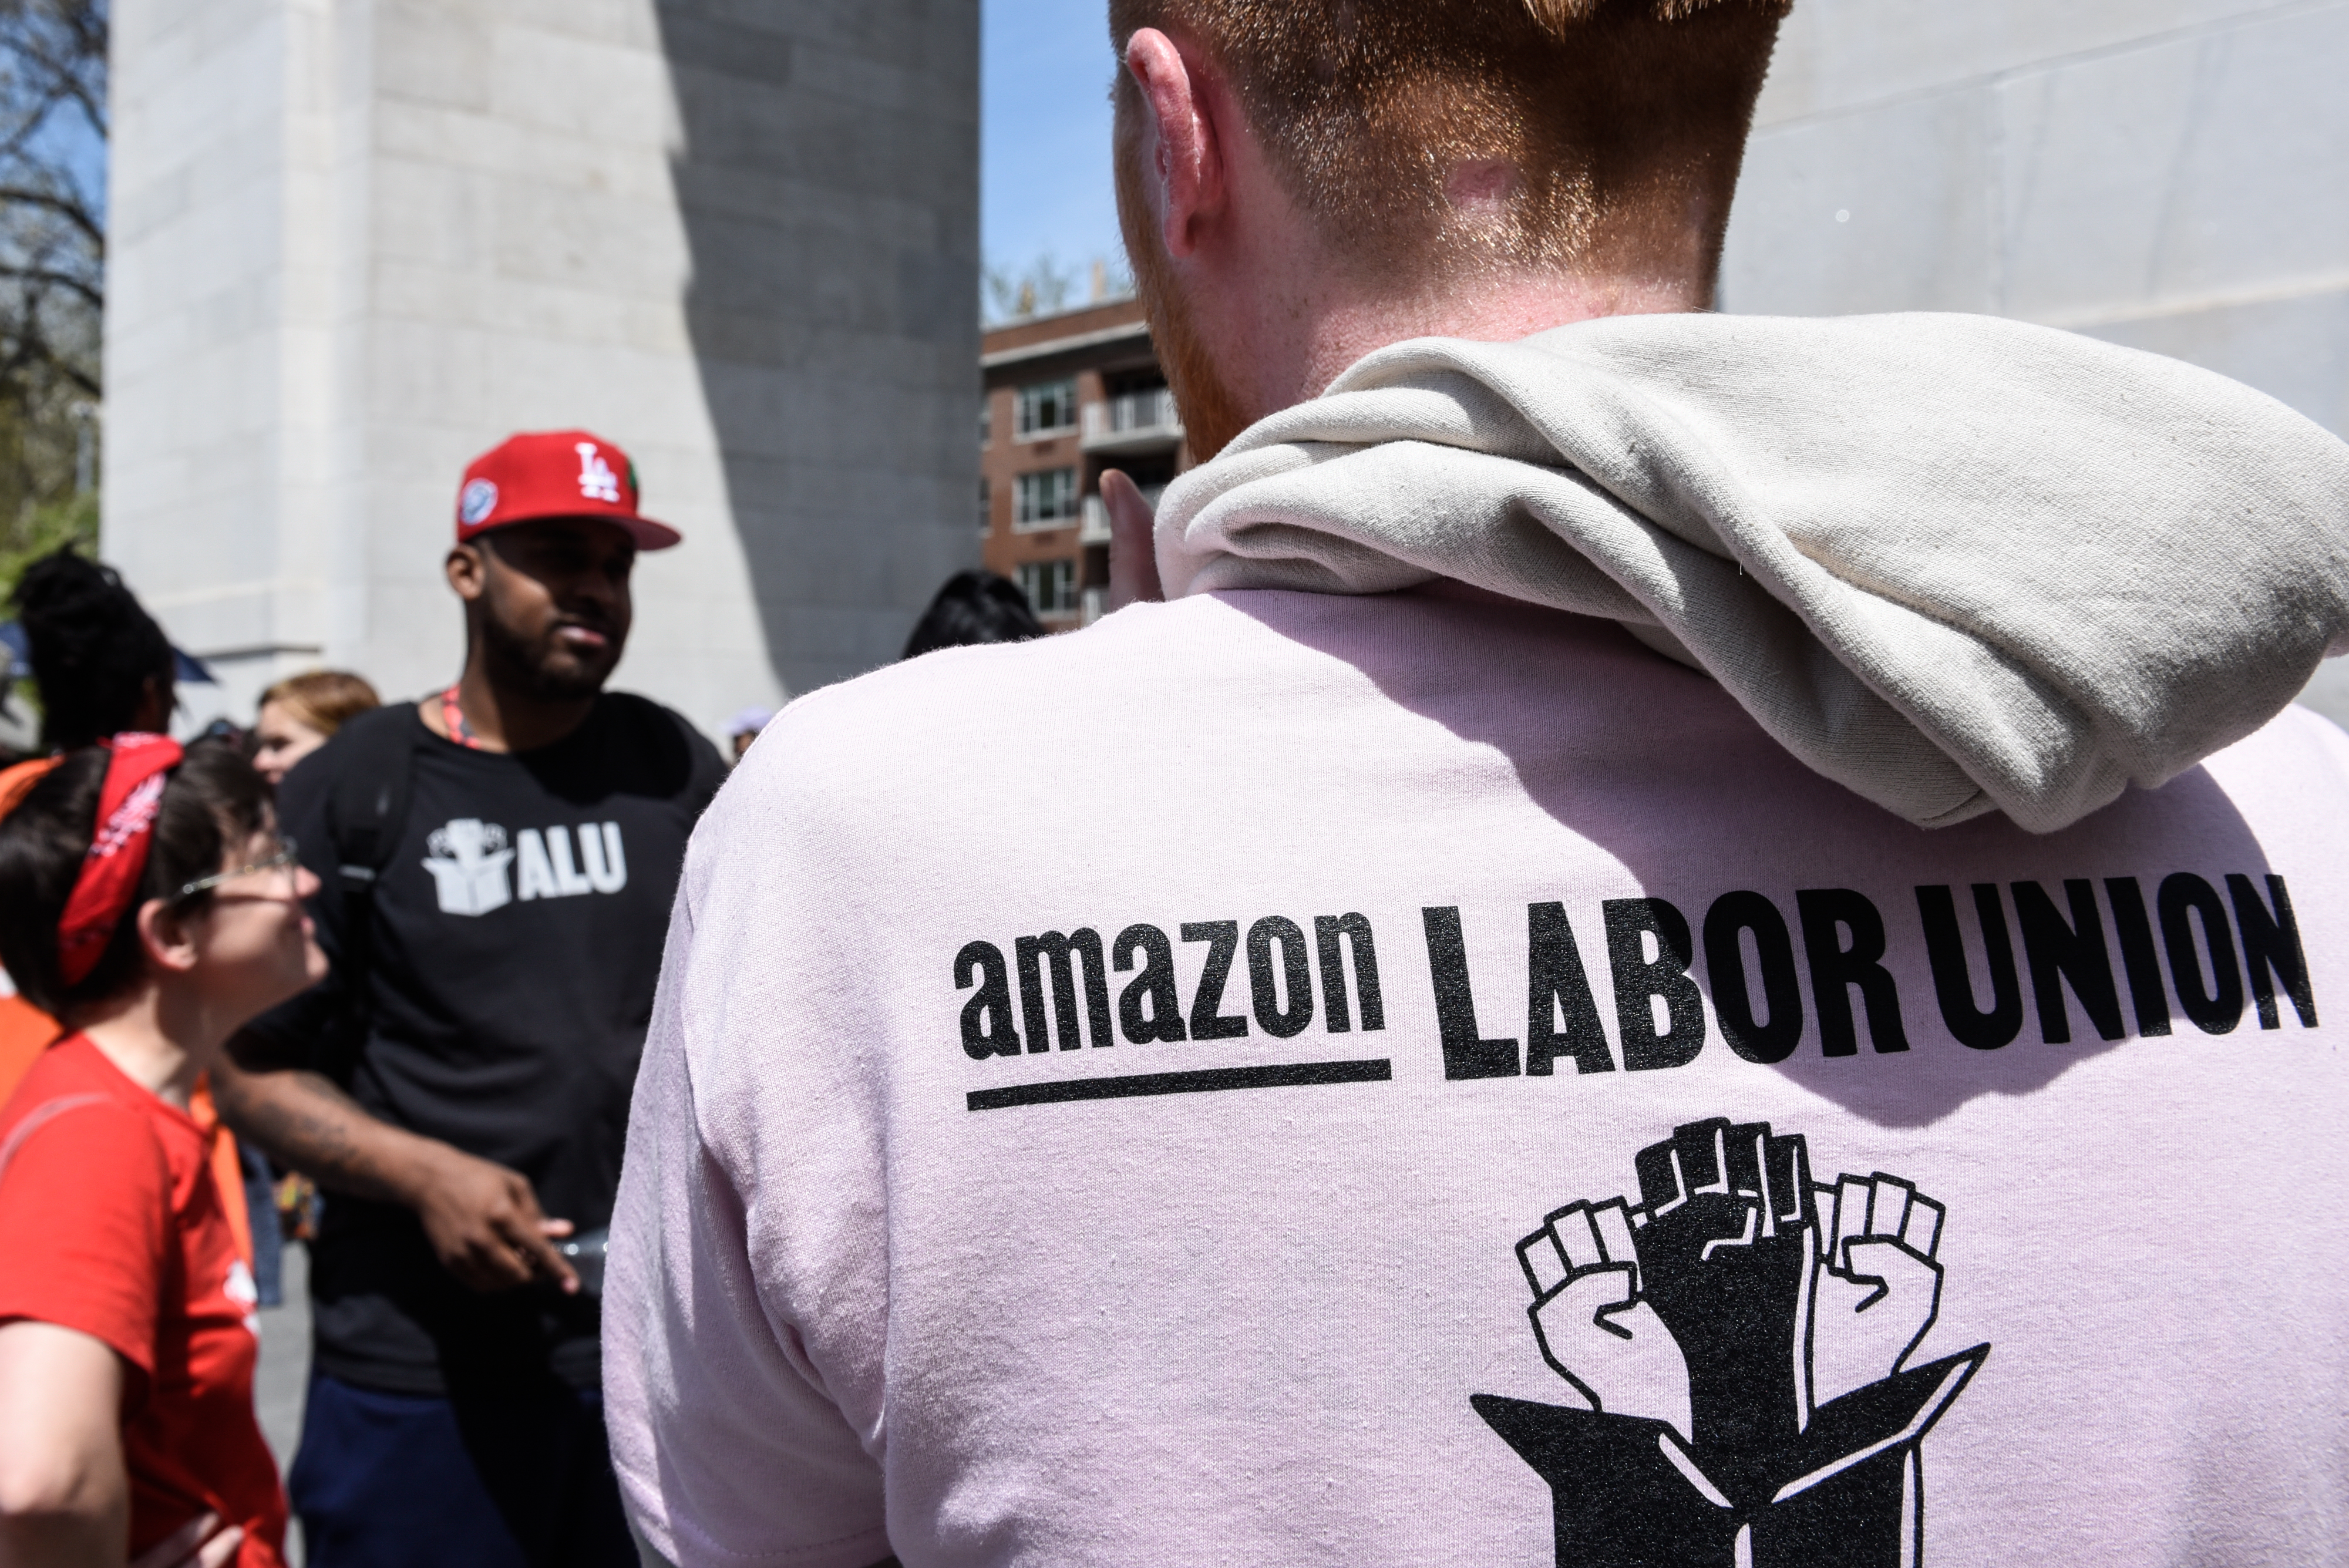 An Amazon worker wearing a hooded sweatshirt with “Amazon Labor Union” written on the back.